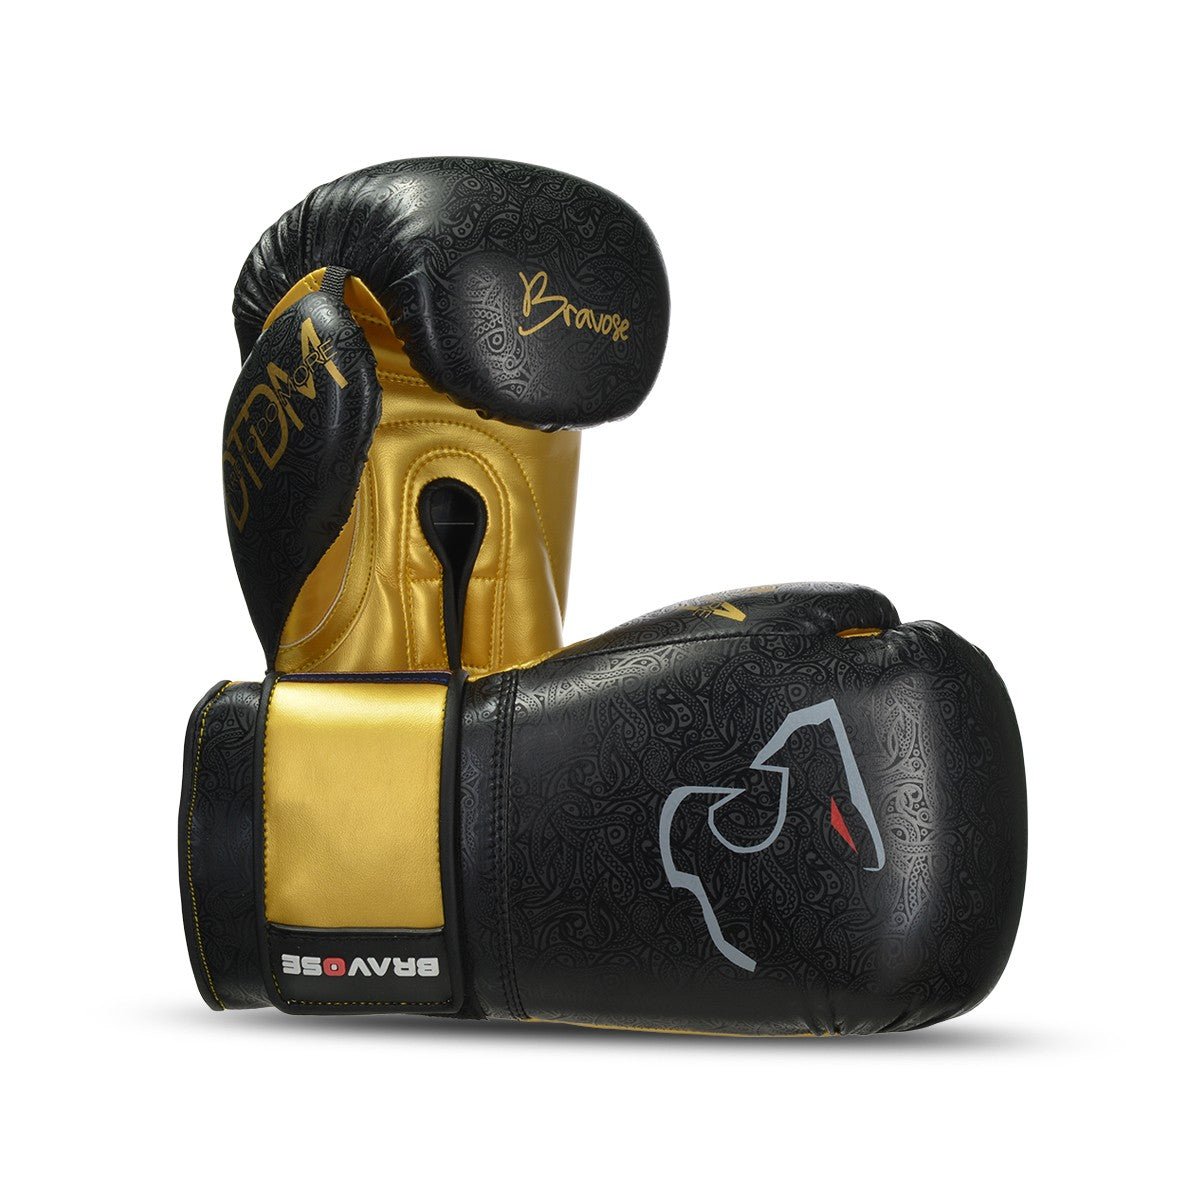 Boxing Gloves Nemesis Black and Gold Professional Mitts - KME means the very best